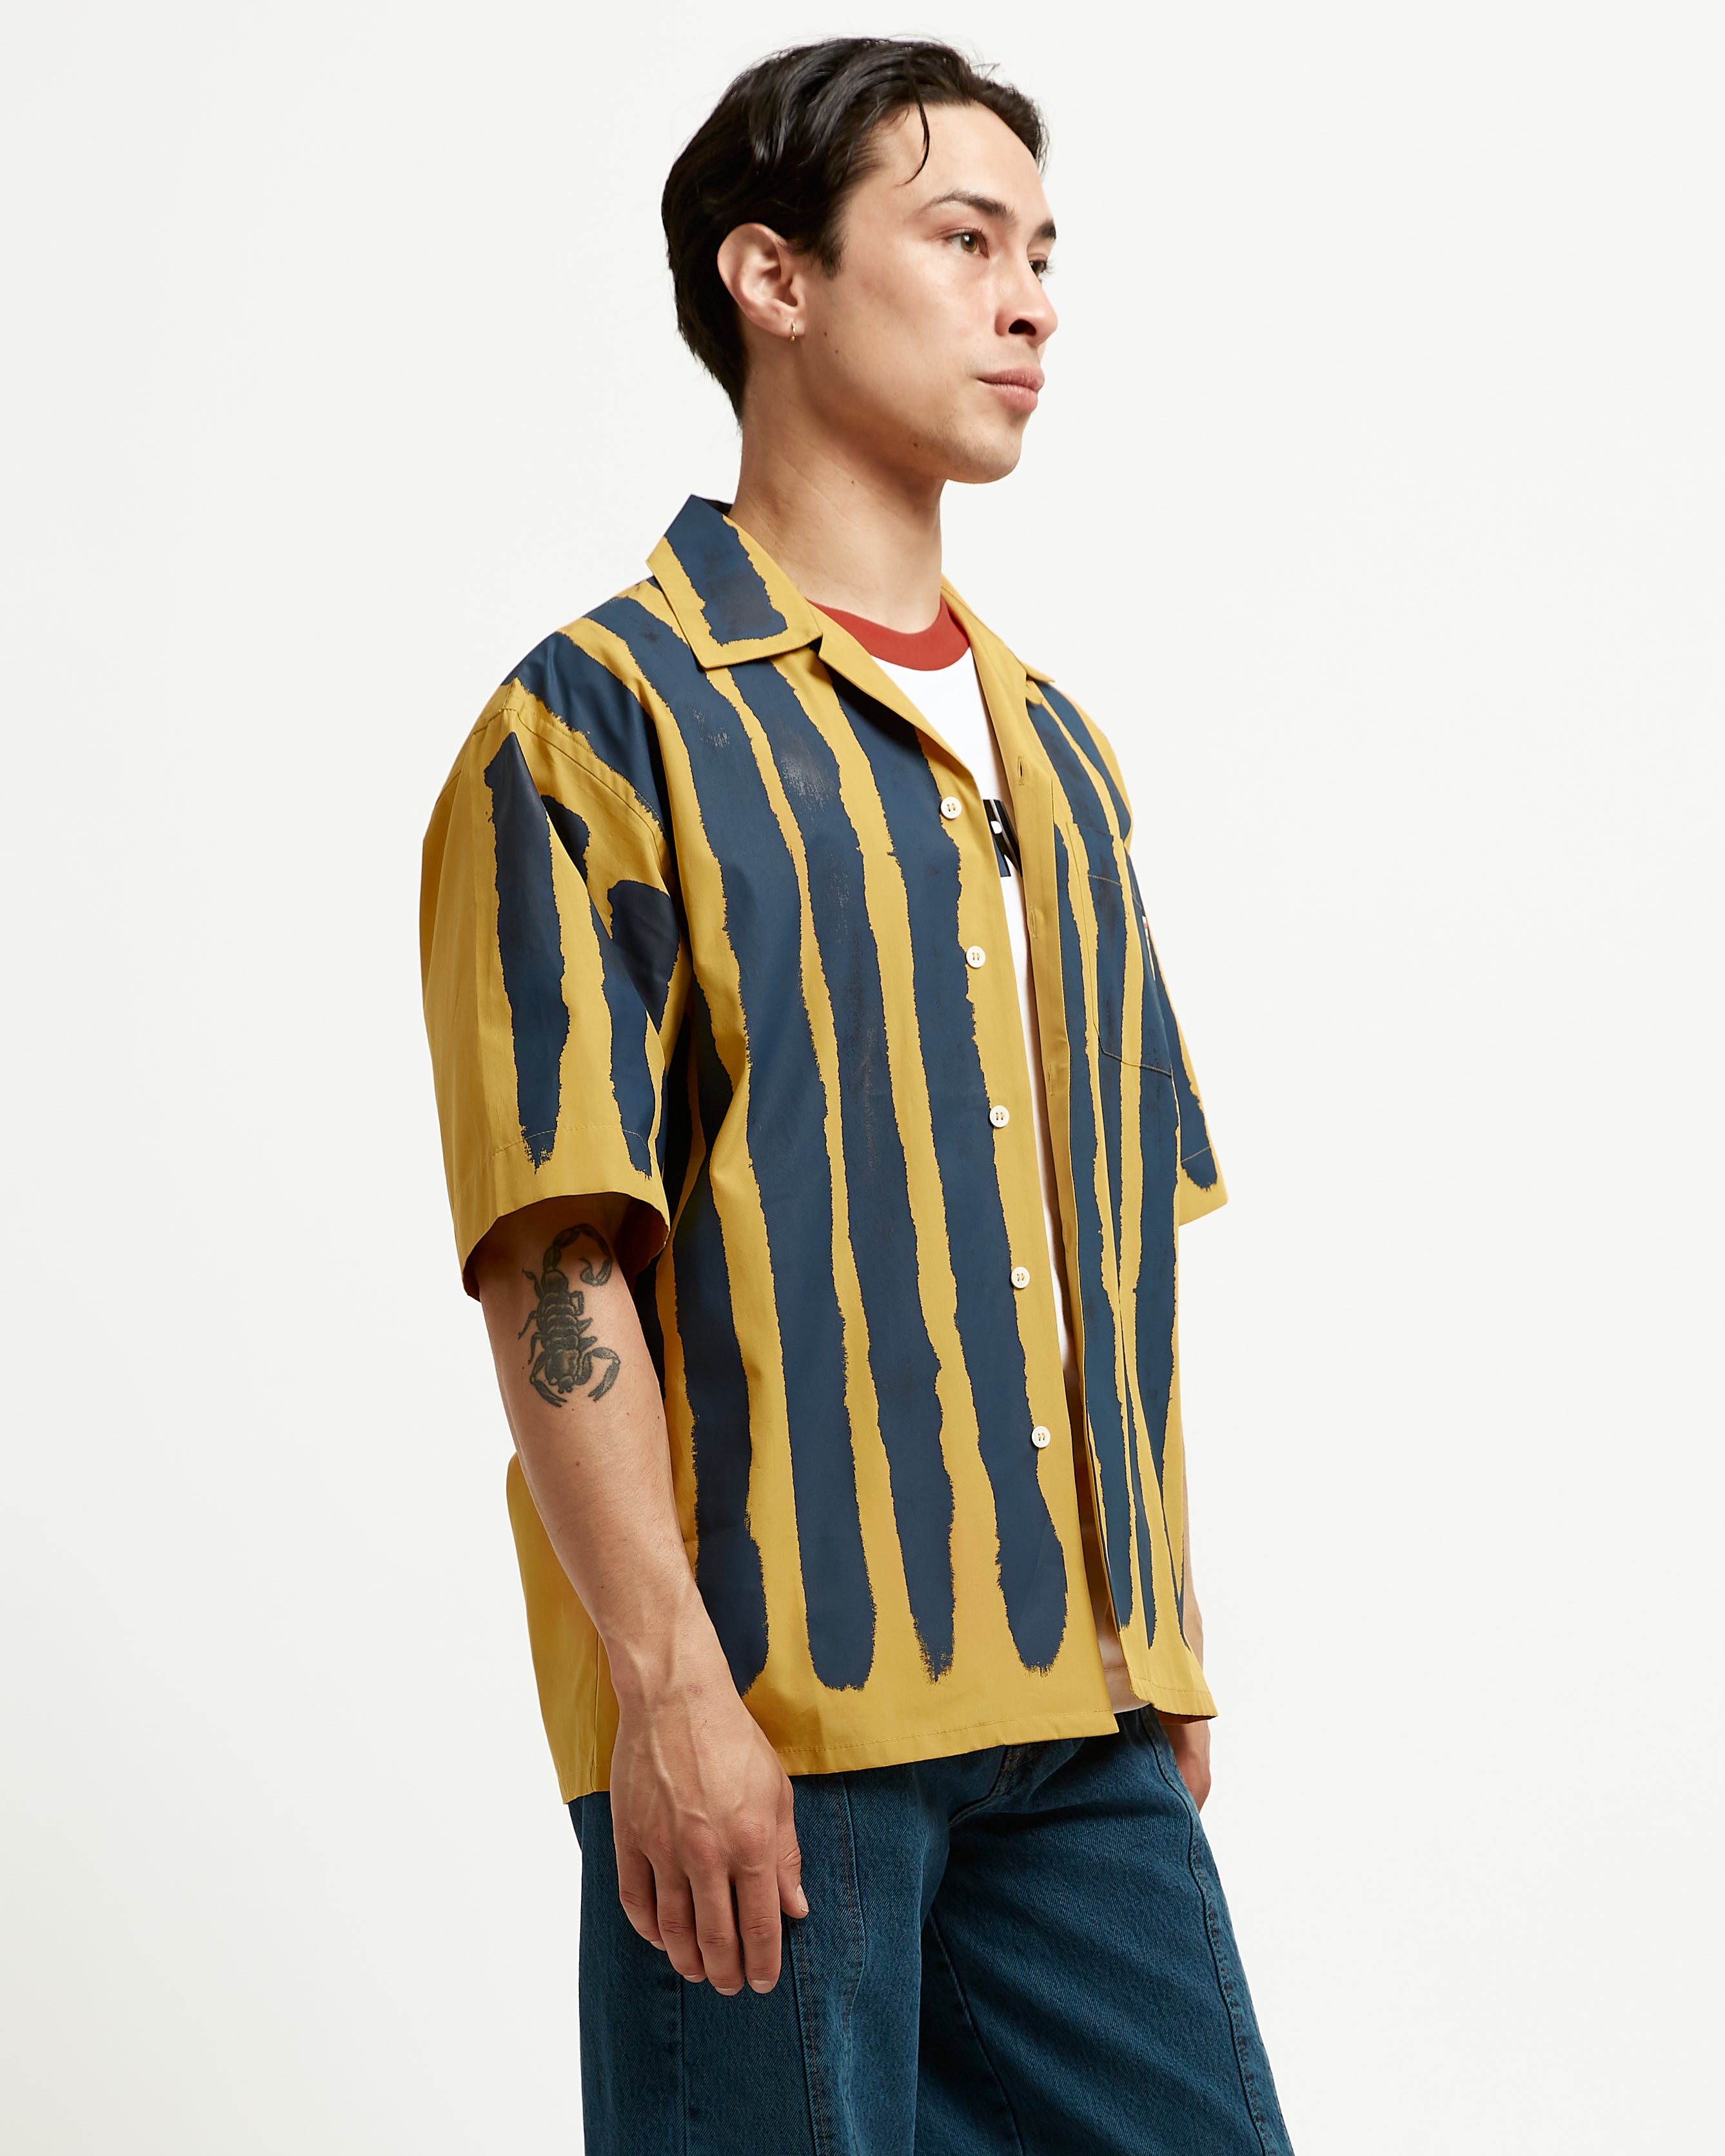 Watercolour Striped Shirt in Navy and Gold